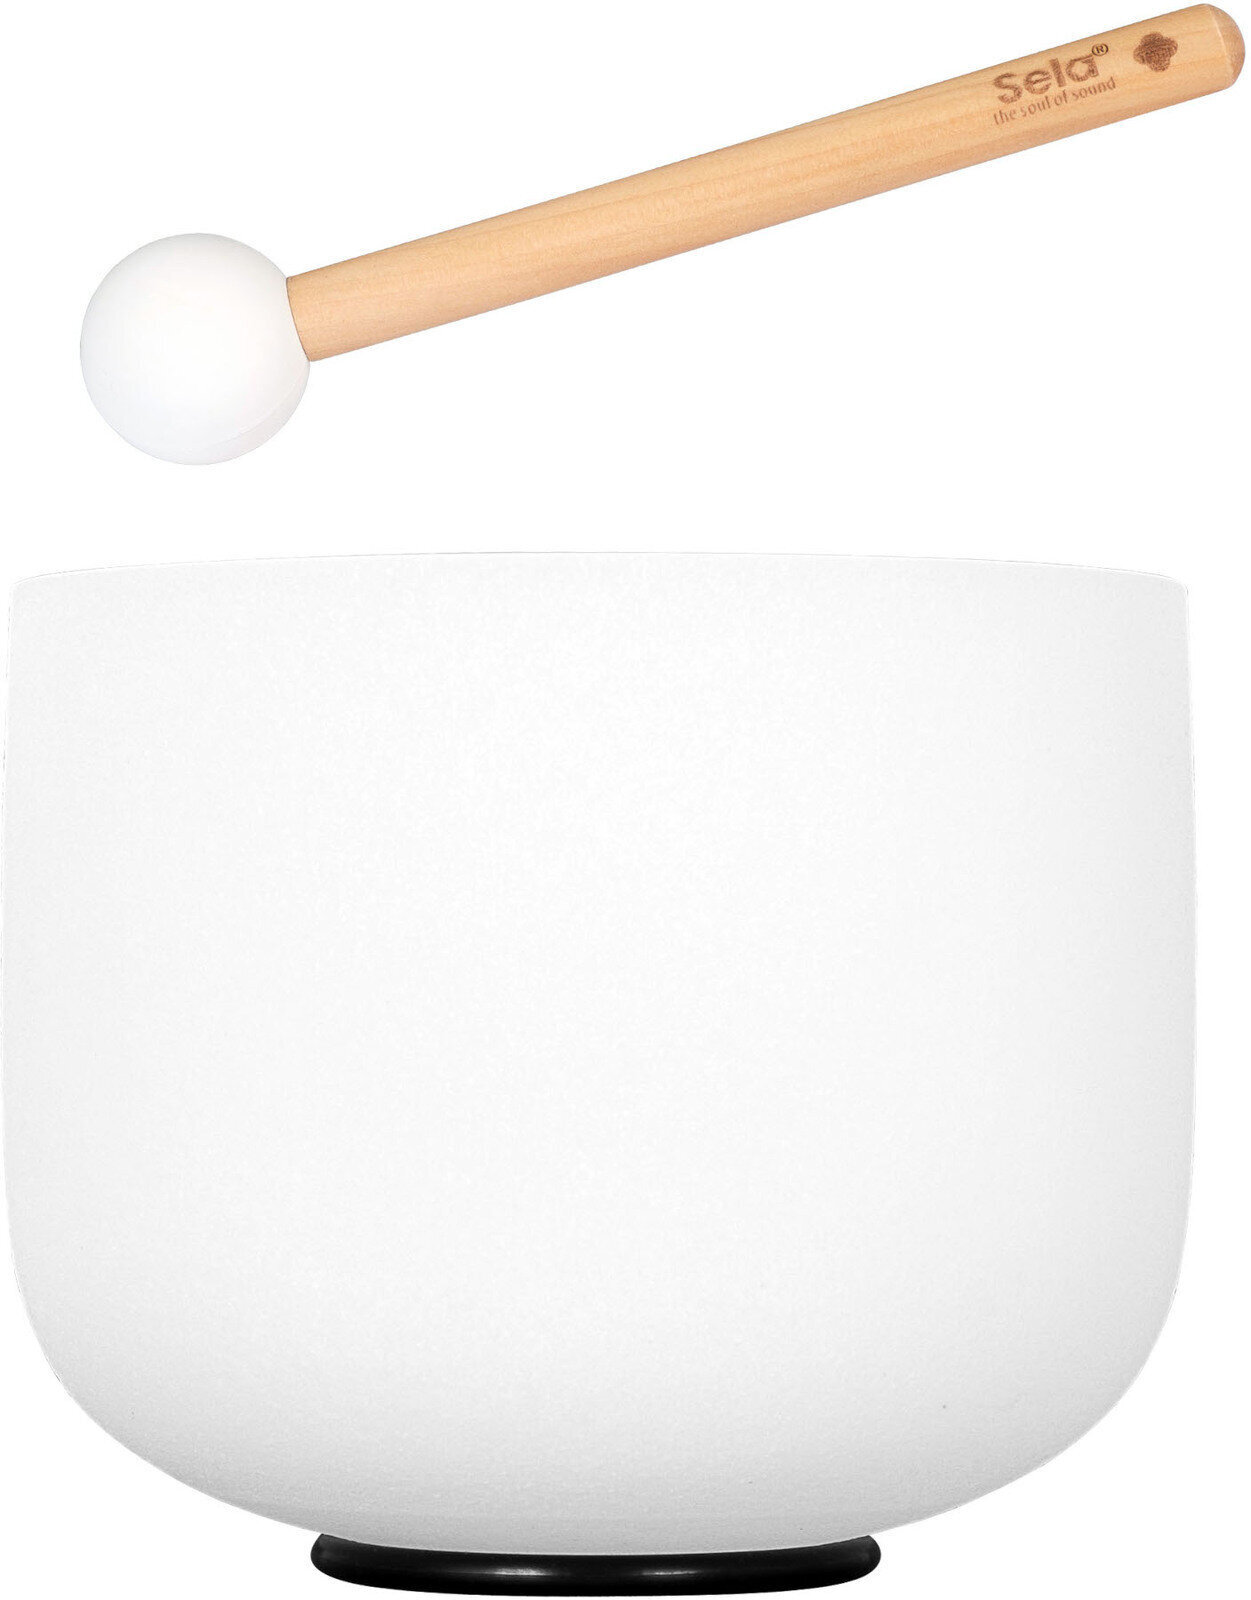 Percussion for music therapy Sela 10" Crystal Singing Bowl Frosted 440 Hz D incl. 1 Wood Mallet